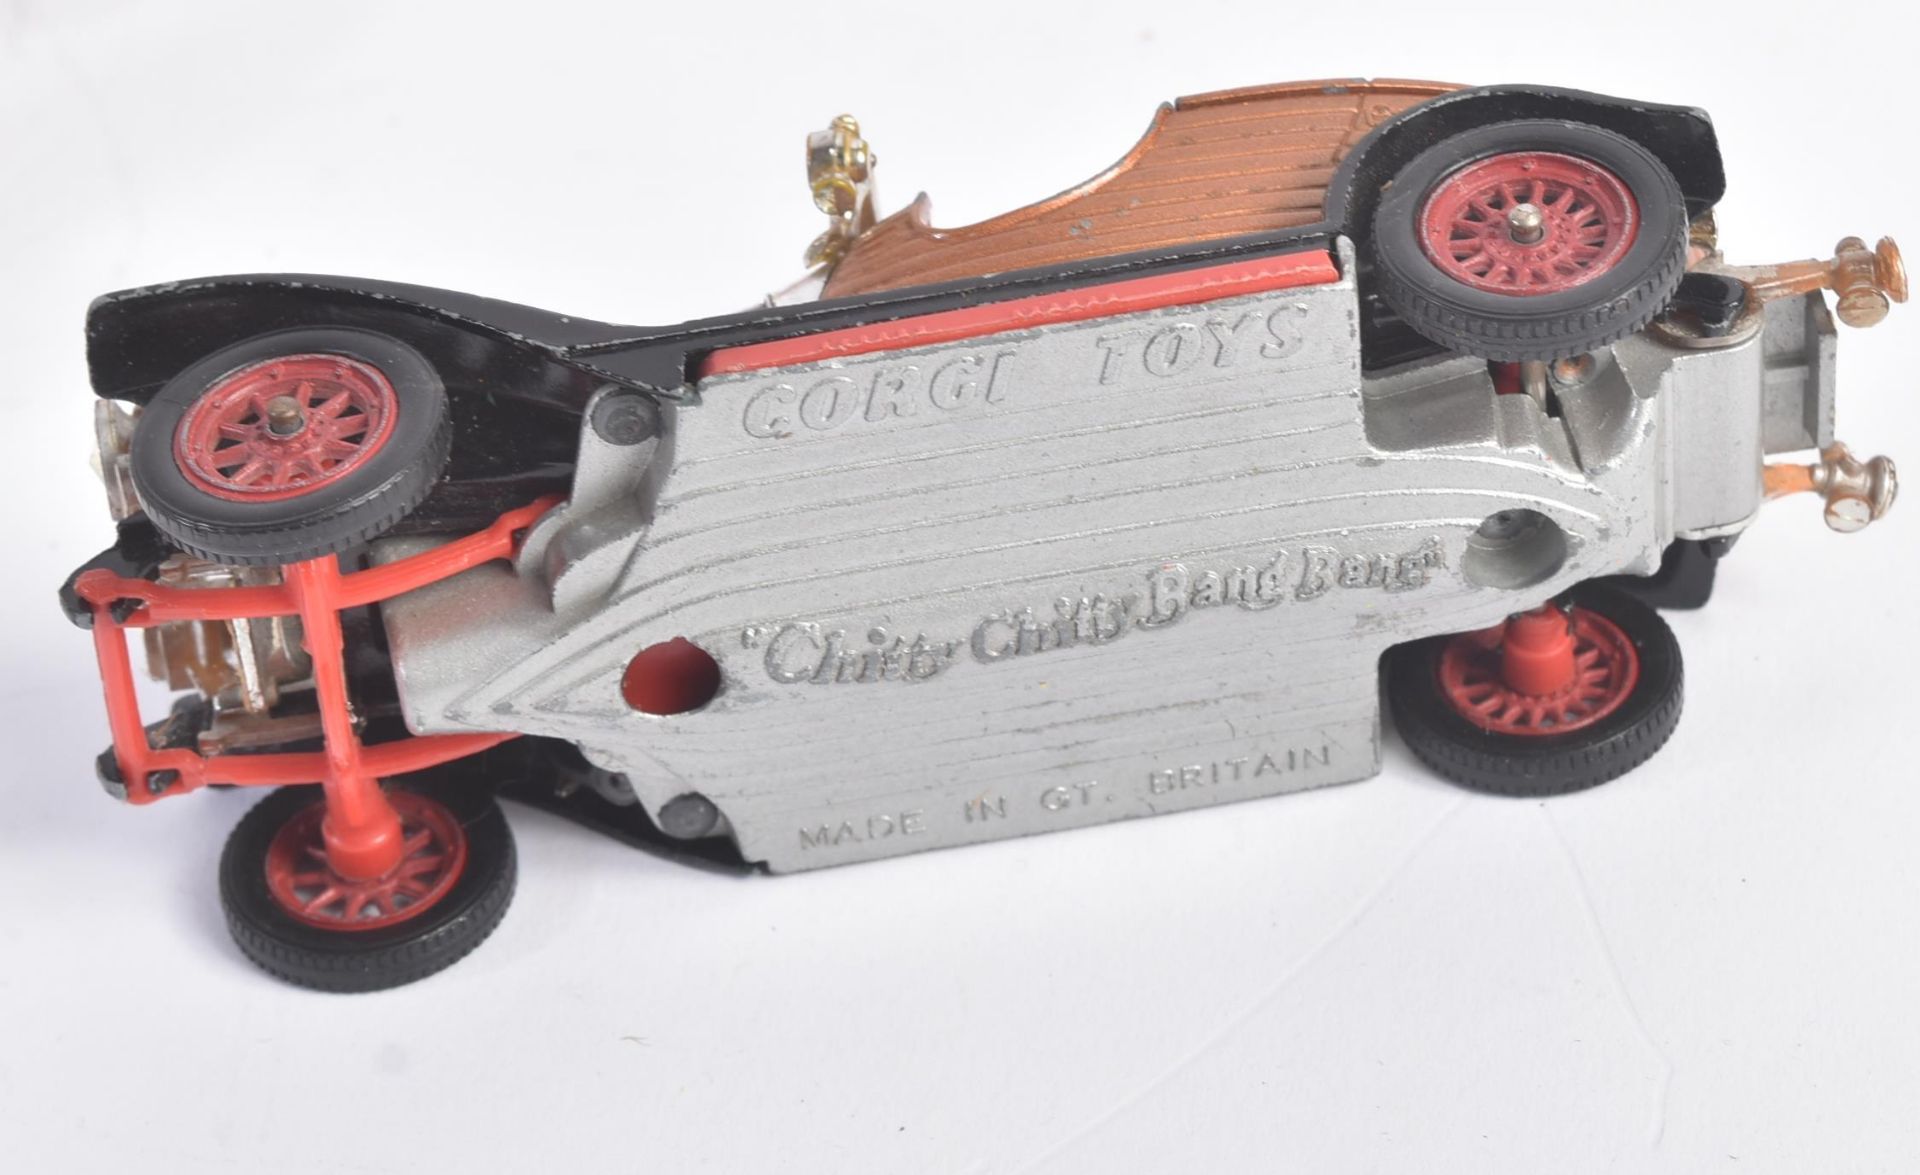 COLLECTION OF CORGI TOYS TV & FILM RELATED DIECAST MODELS - Image 8 of 12